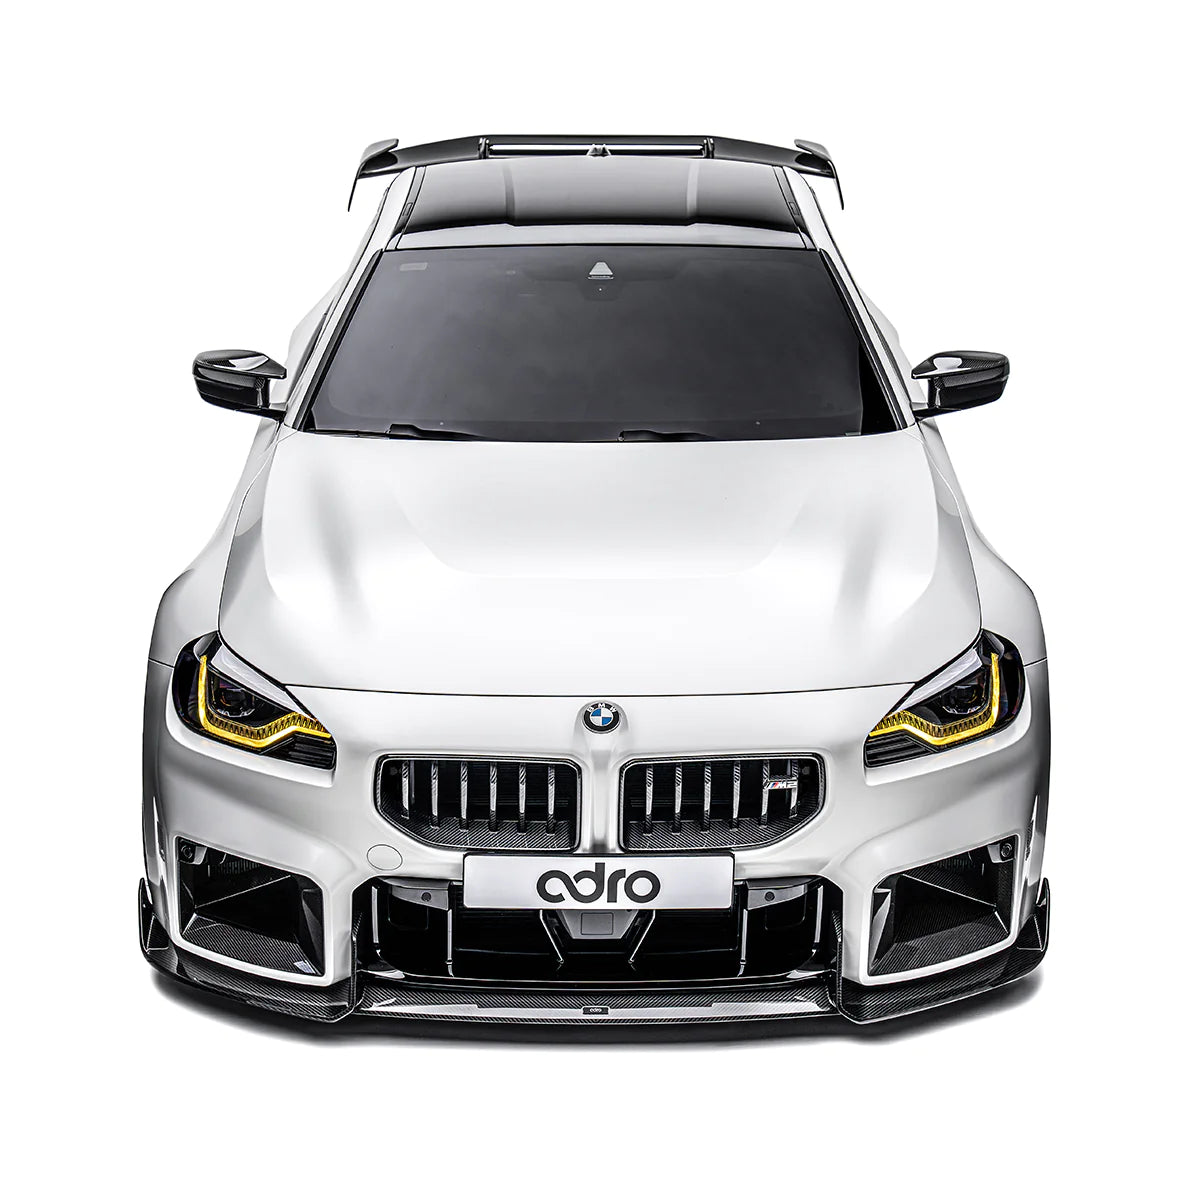 ADRO BMW G87 M2 FRONT GRILLE - PREORDER NOW!